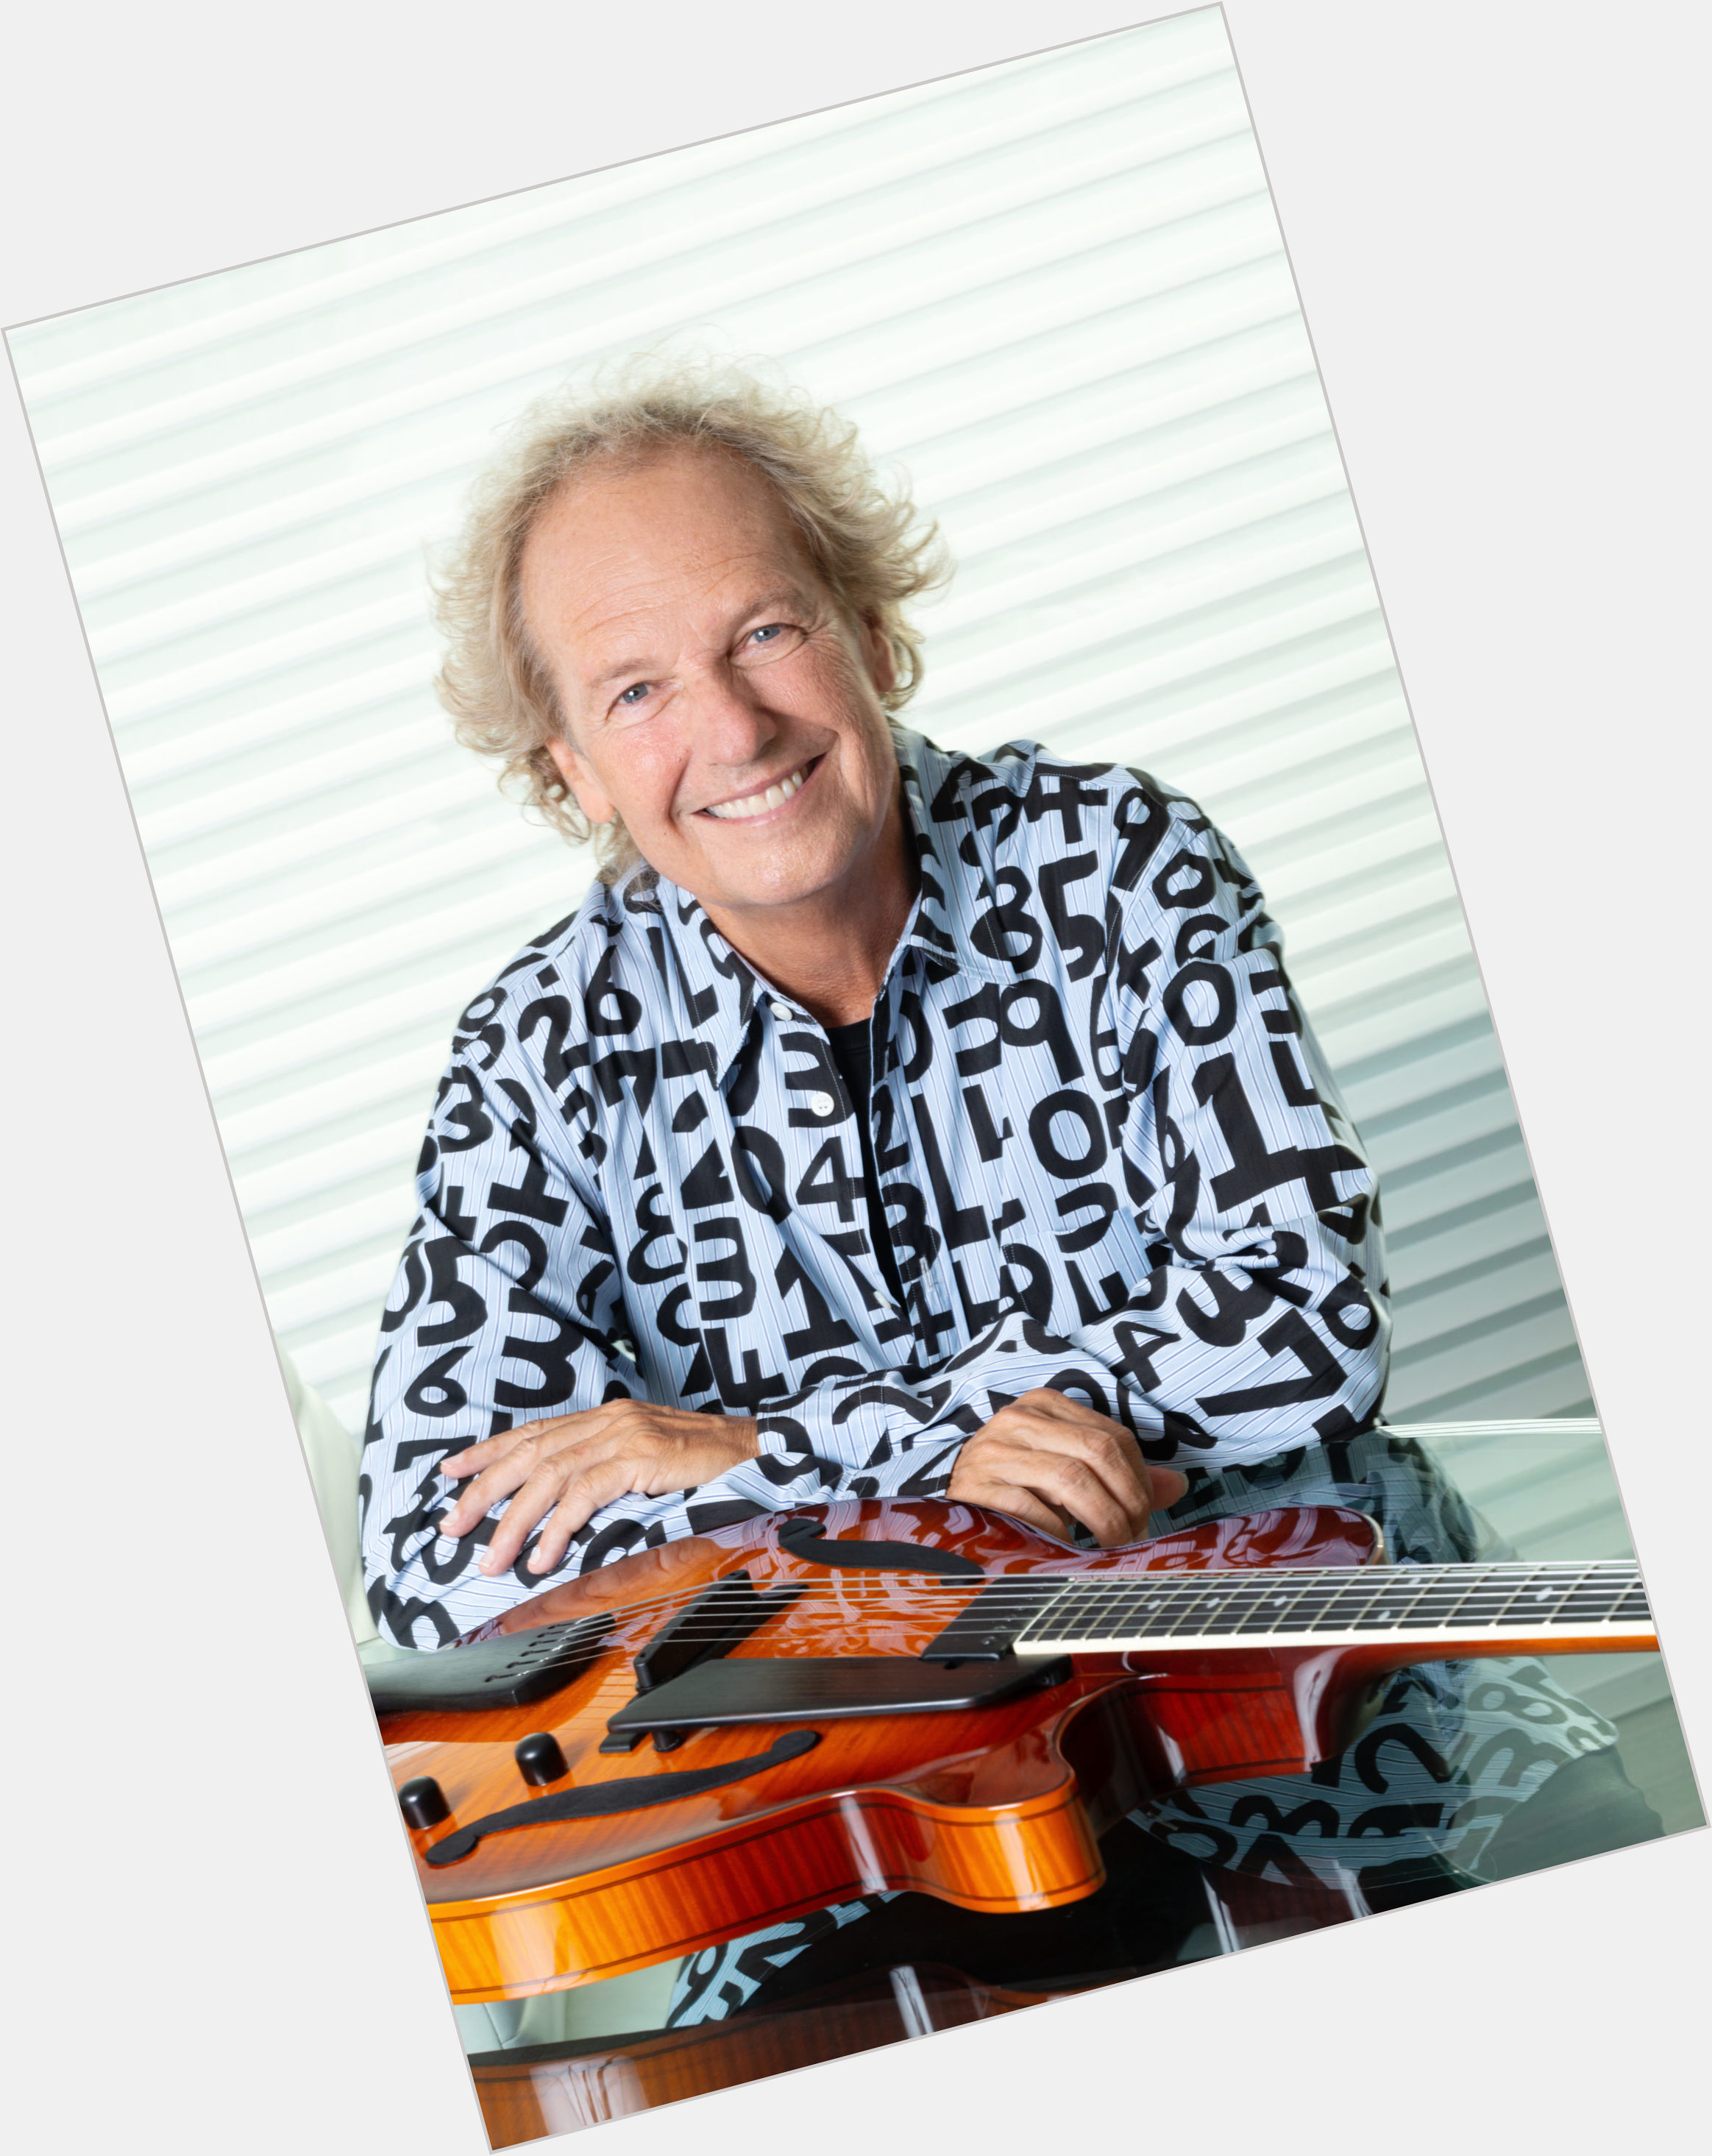 Lee Ritenour dating 1